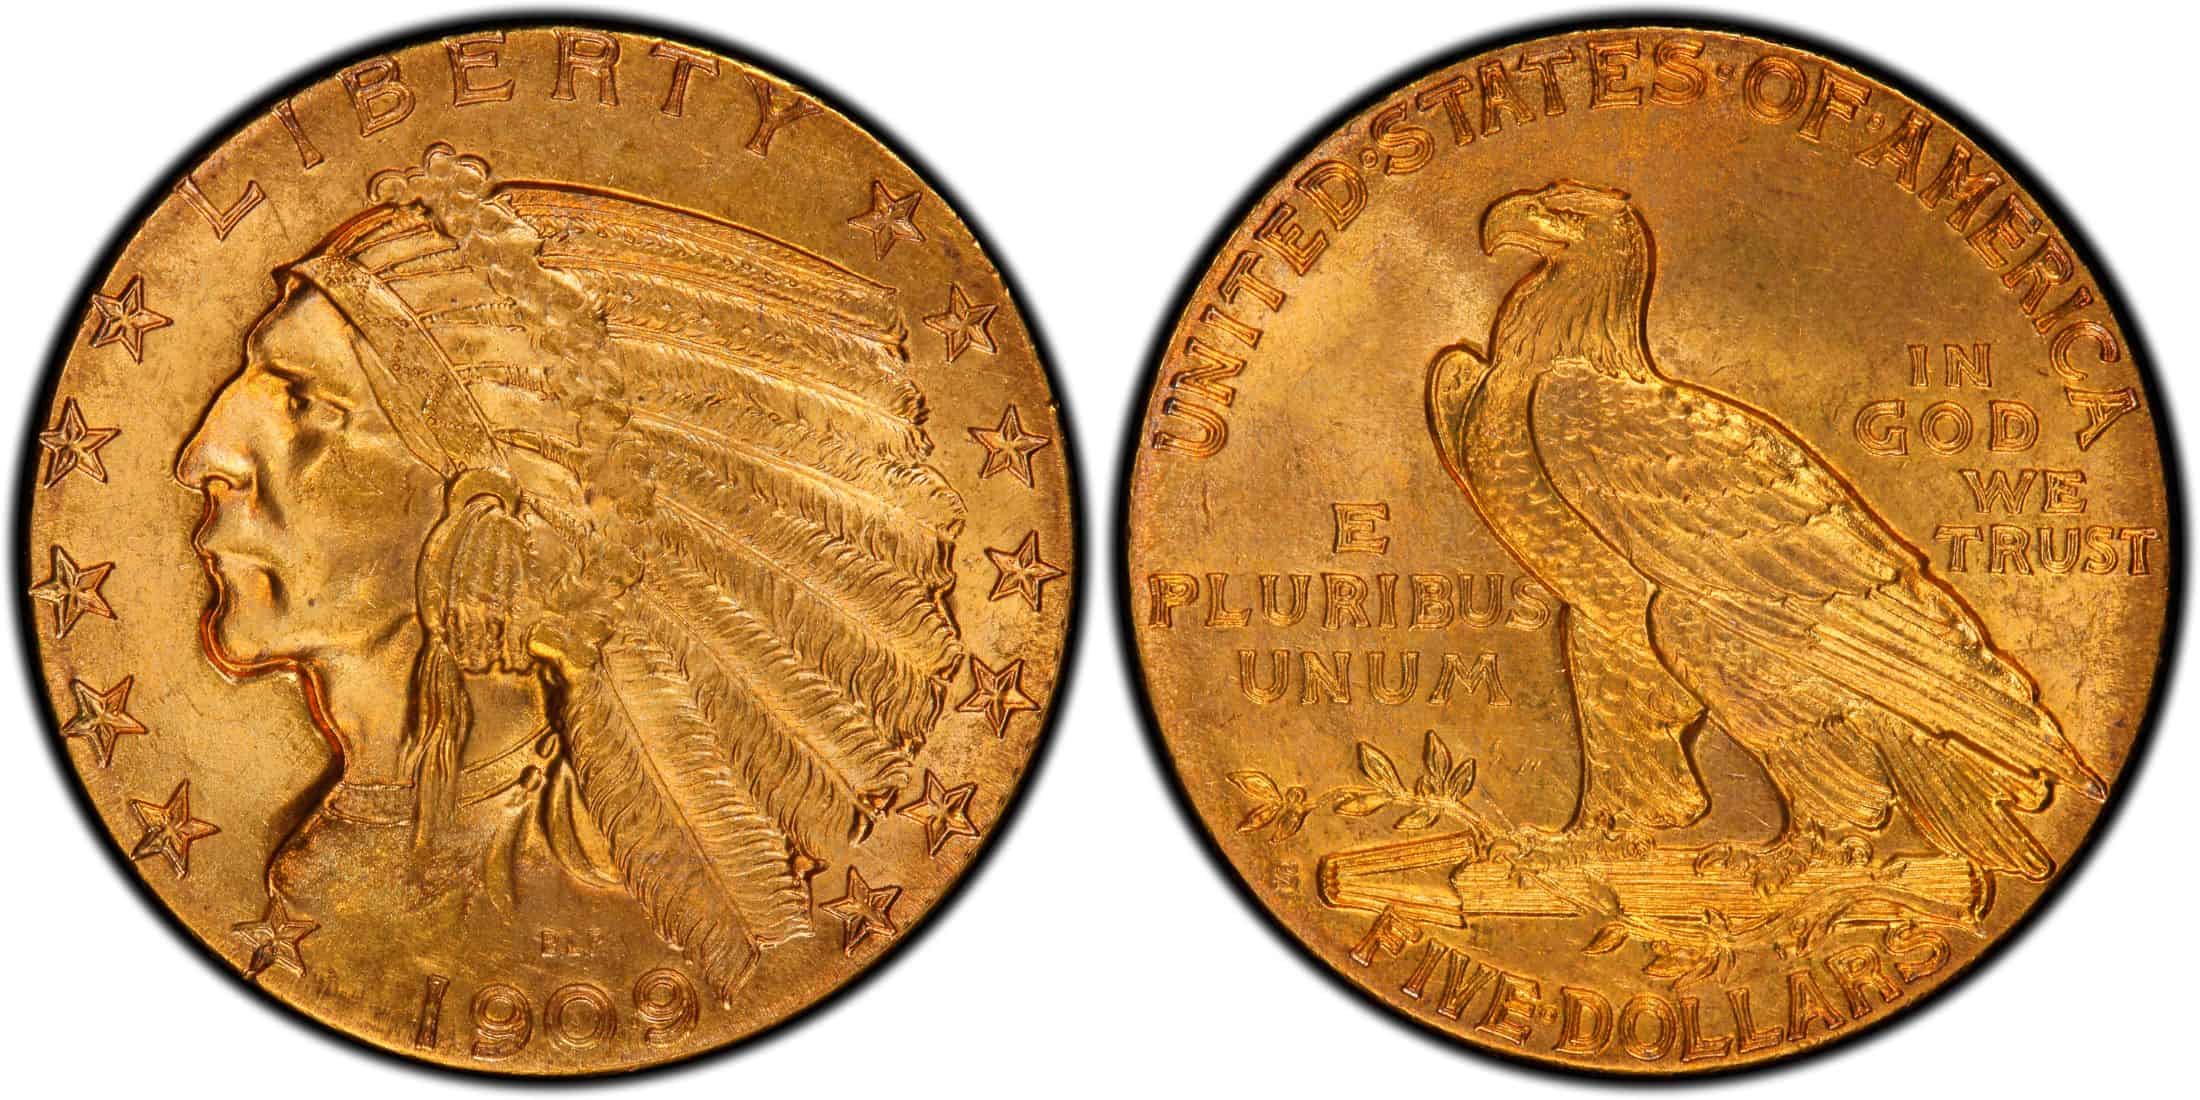 The 1909-S Indian $5 gold coin